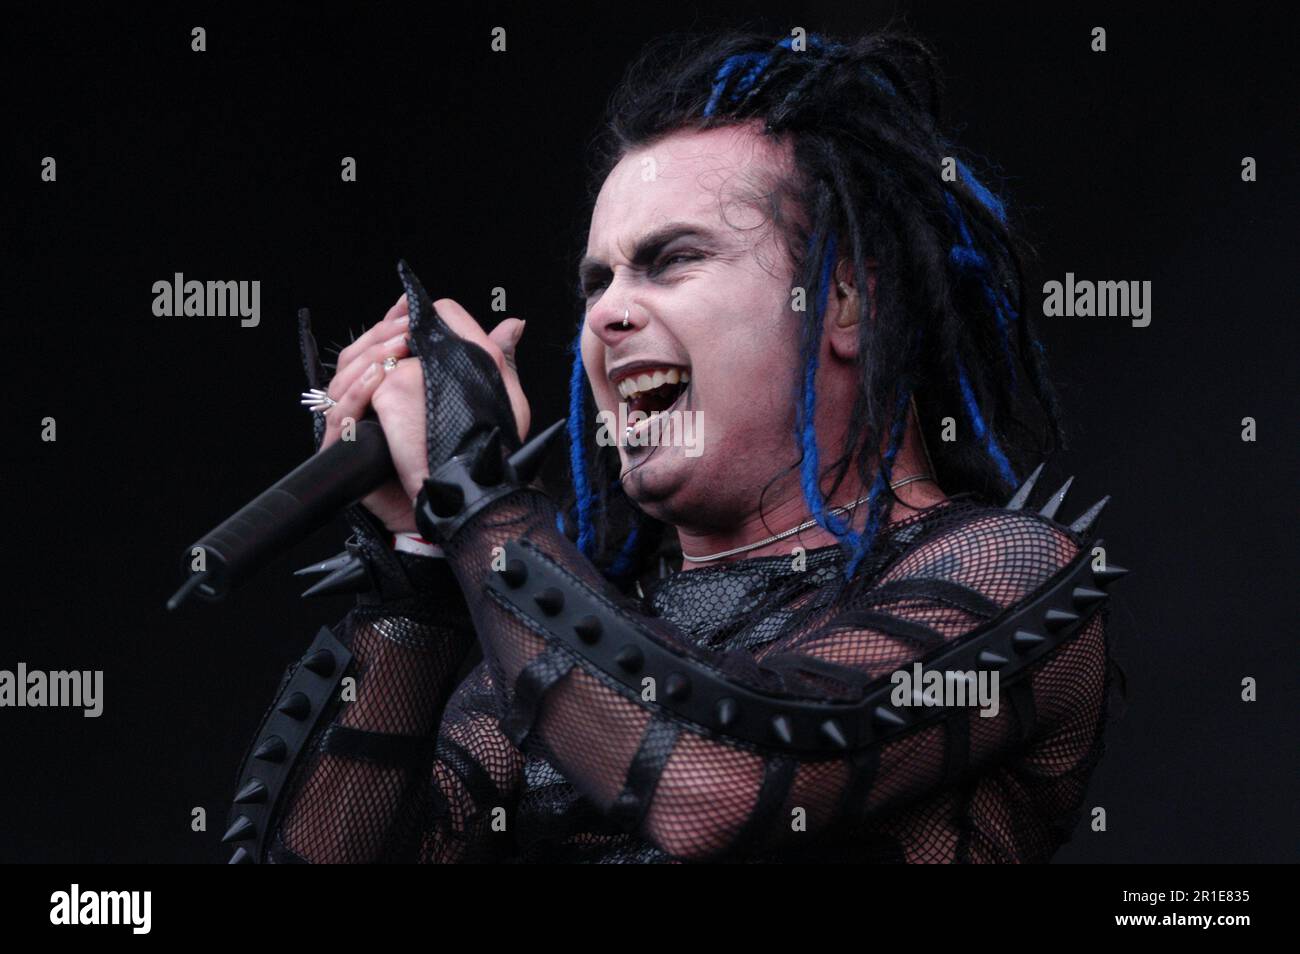 Imola Italy 2003-06-15 : Dani Filth singer of Cradle of Filth in concert at the Heiniken Jammin Festival Stock Photo